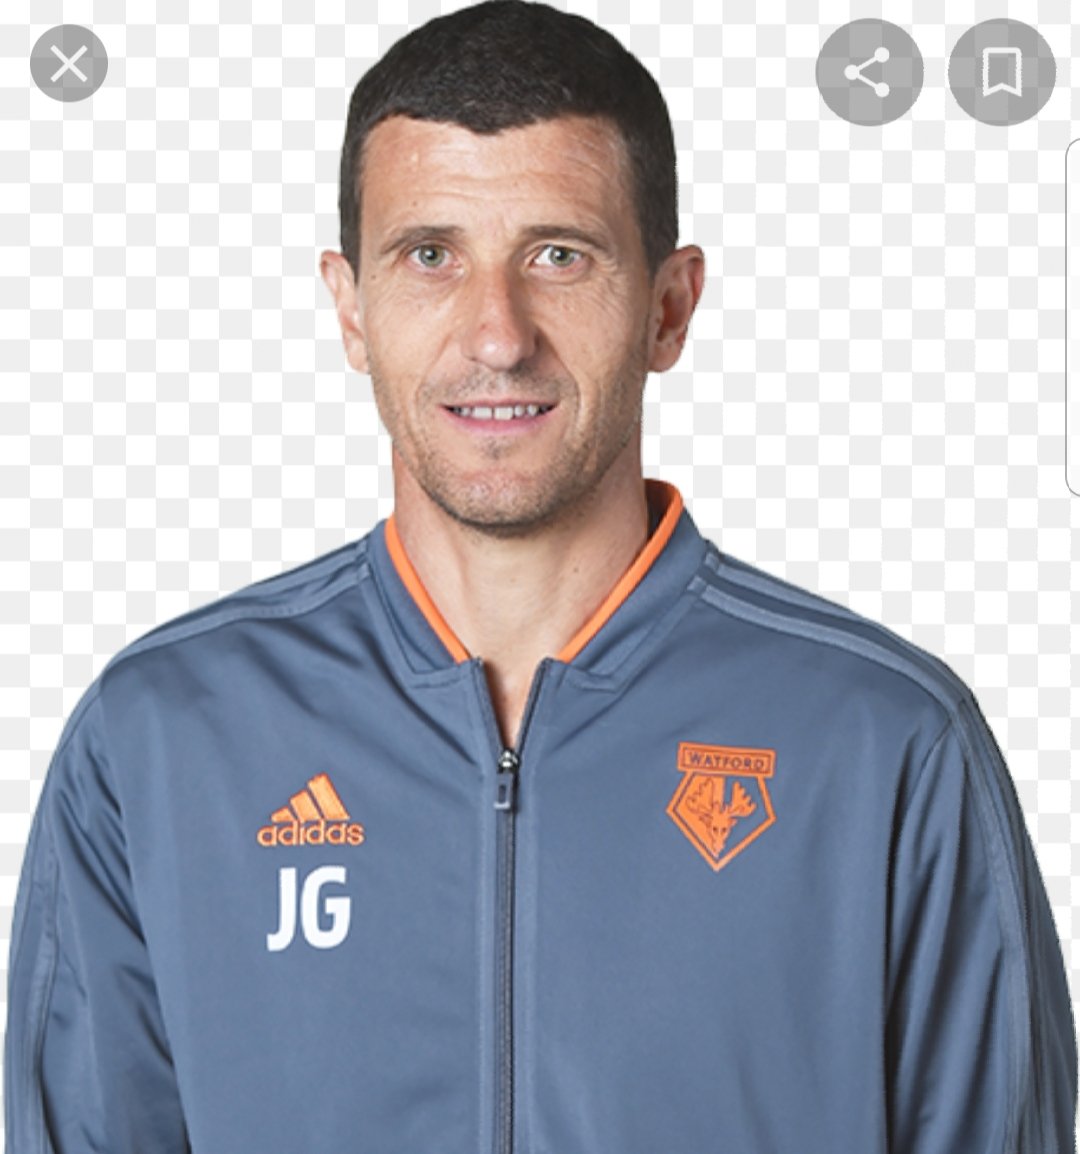 4 weeks in Javi Gracia was sacked. Granted a poor start to the season but just months before he had lead us to our first FA cup final in years! 4 gameweeks is very early. Let's sit and ponder who they may bring in for a while....I hope the interview all possible candidates...